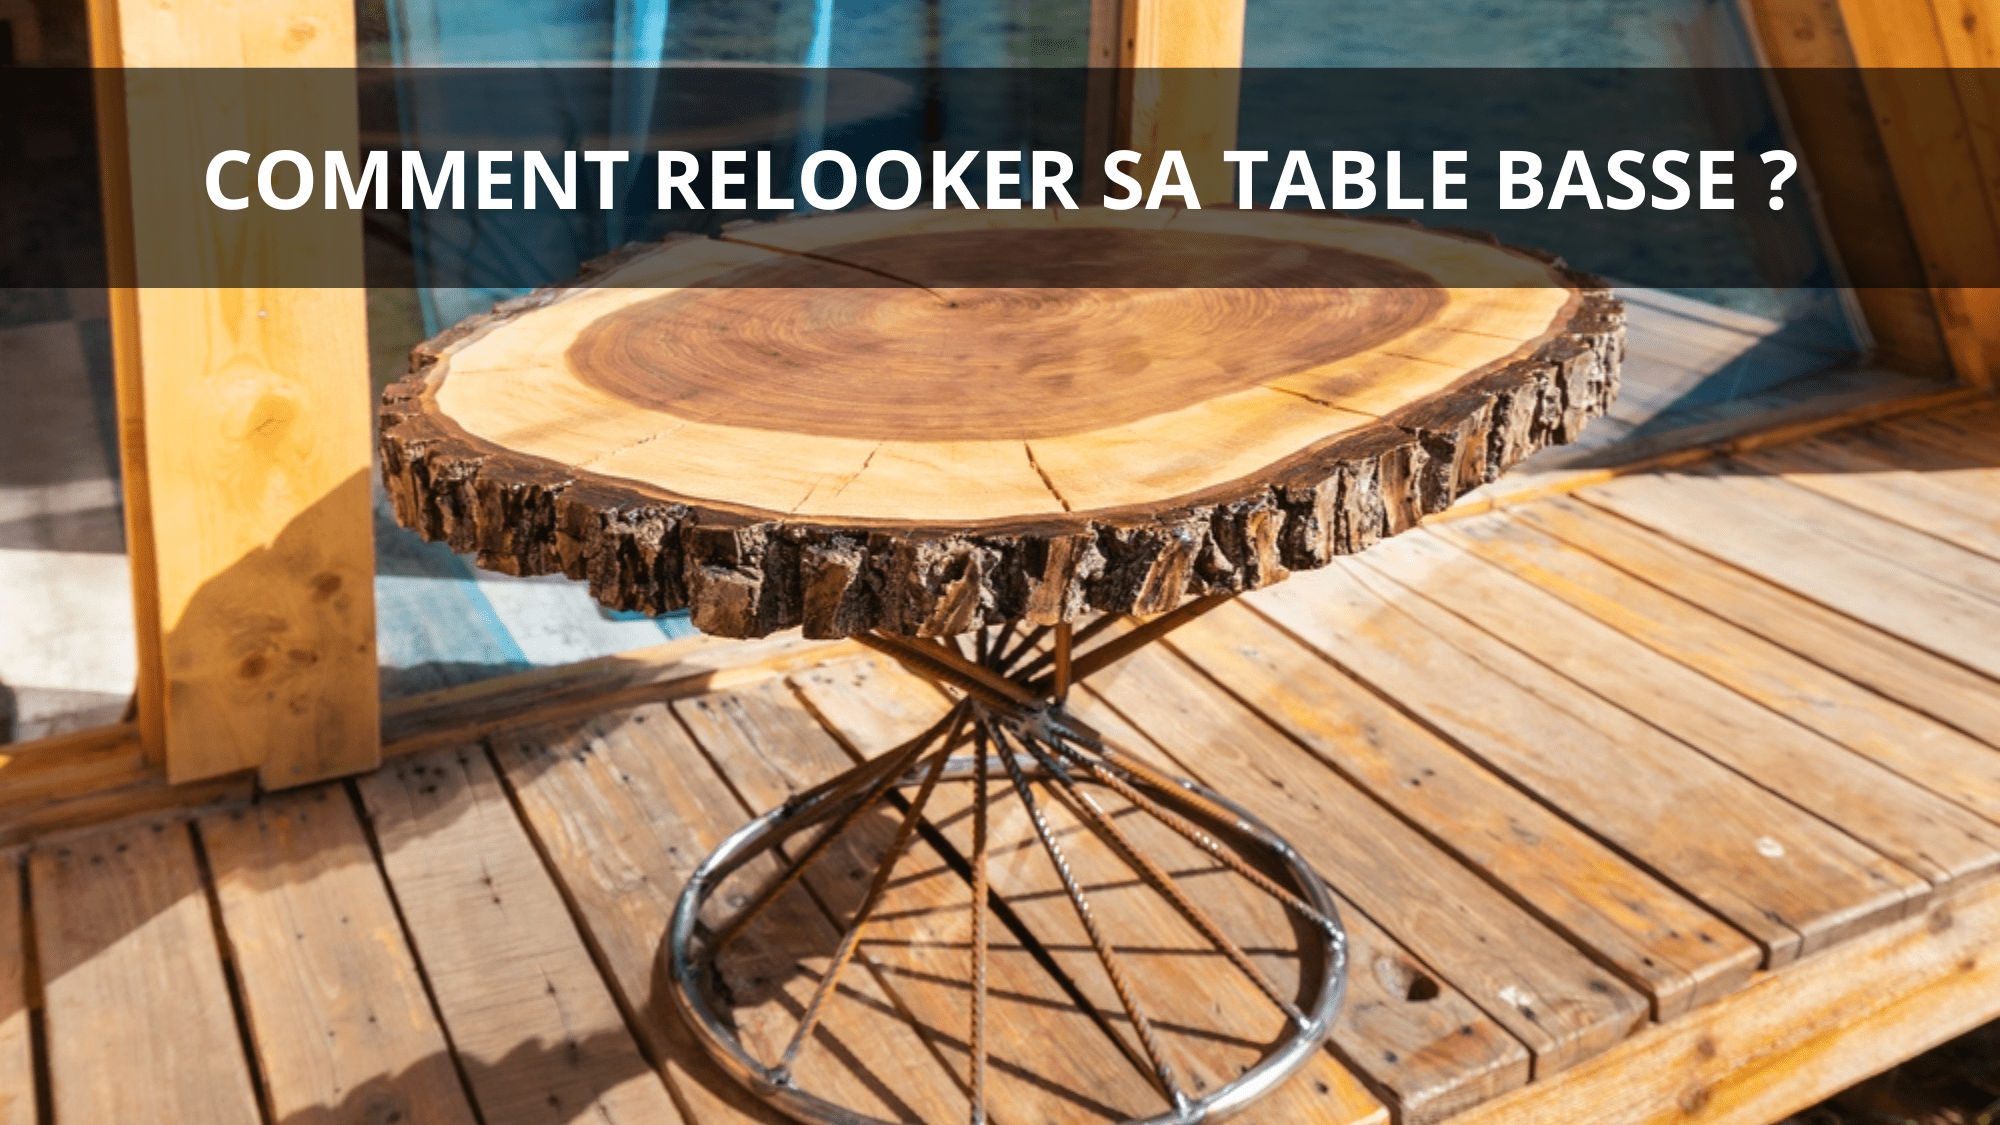 Comment relooker sa table basse ?